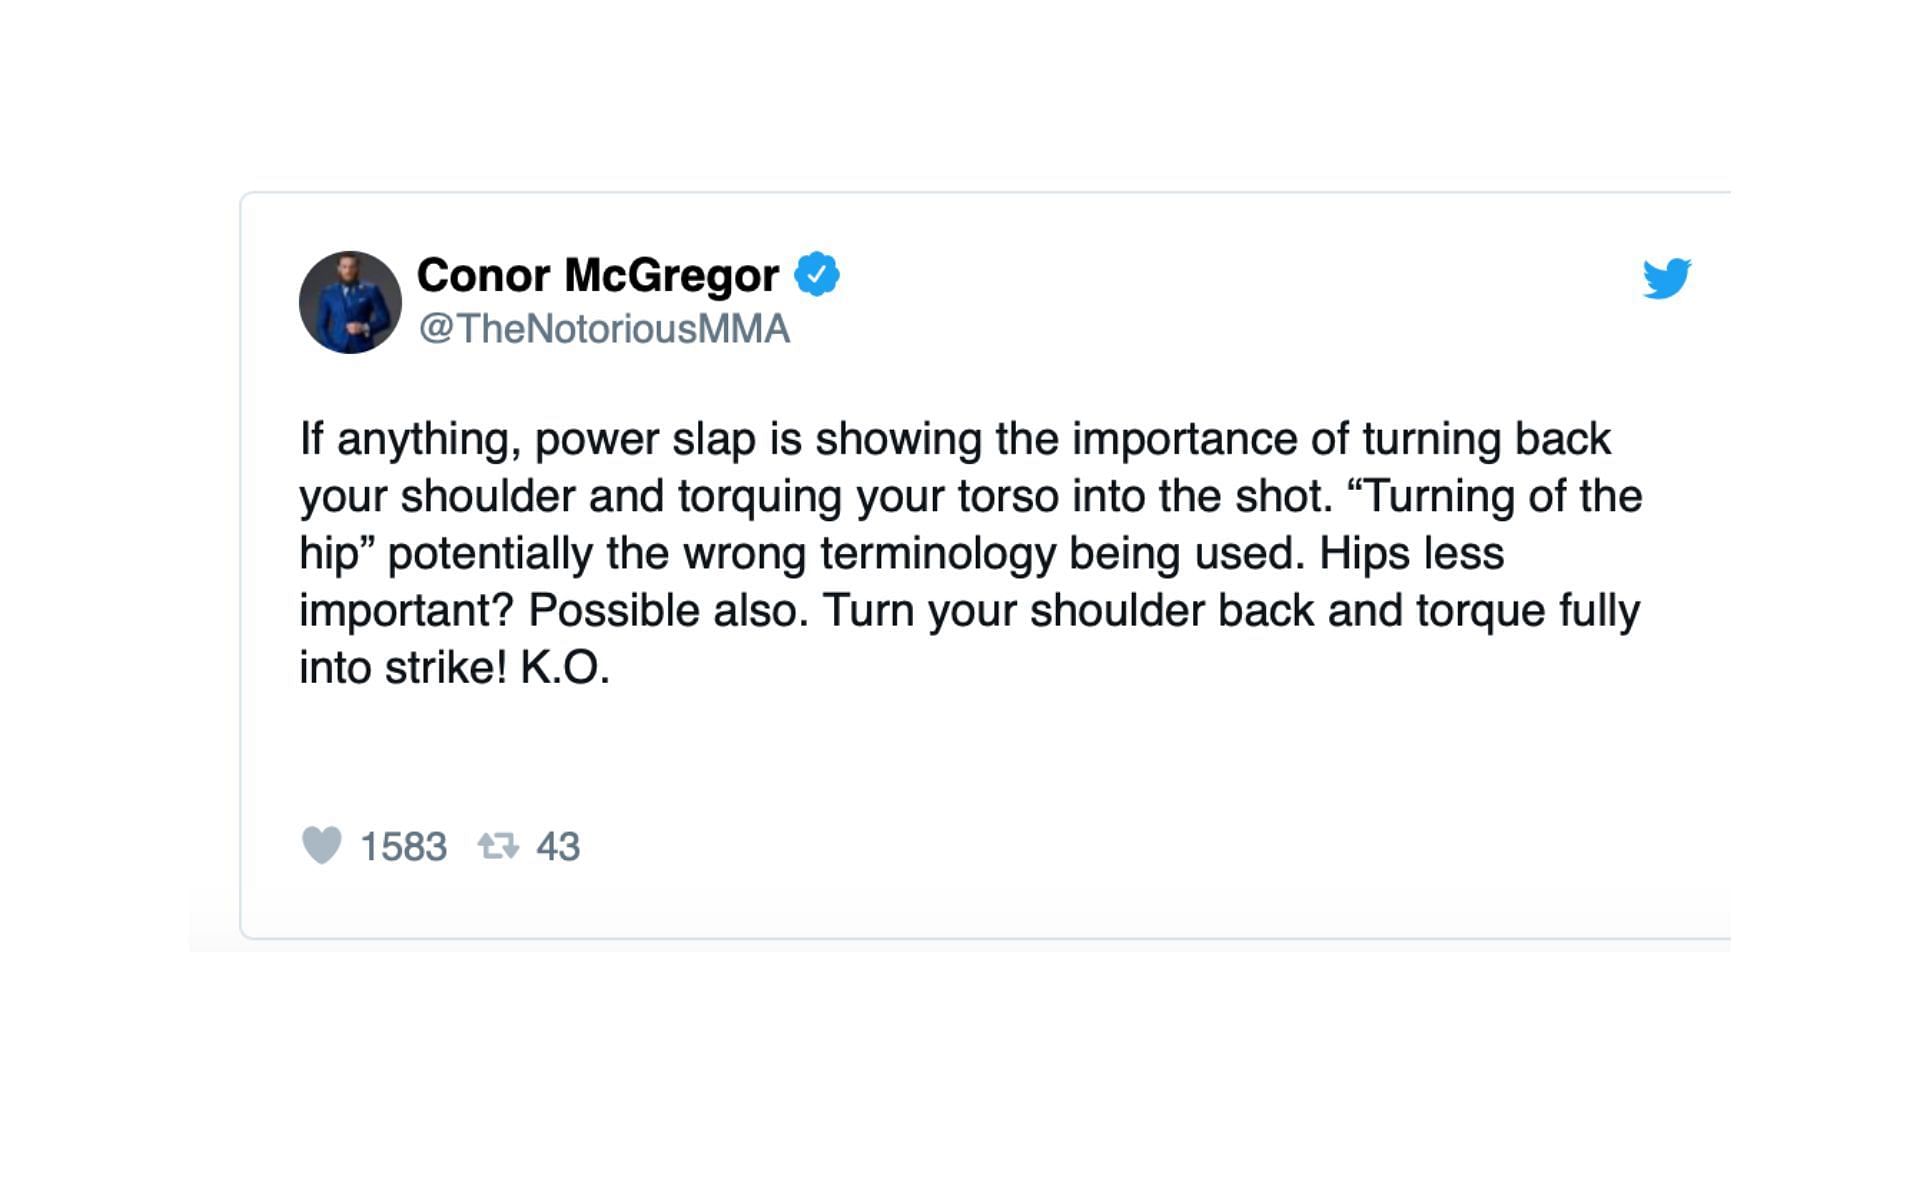 Screenshot from @TheNotoriousMMA on Twitter